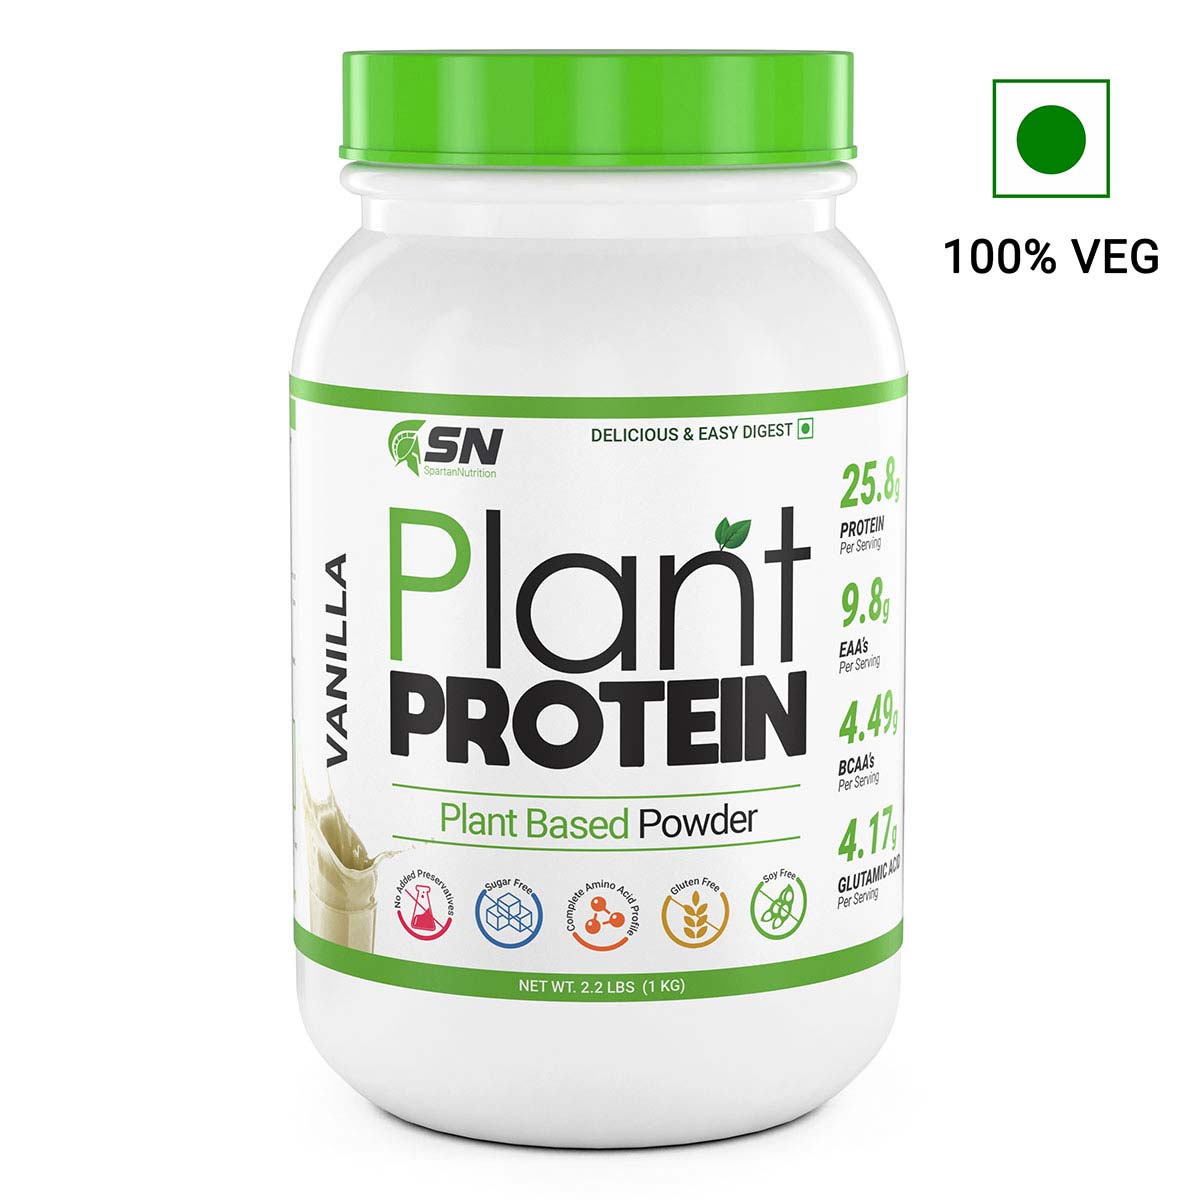 Spartan Nutrition Plant Protein – 2.2LBS, with Protein - 25.8g, EAA’s - 9.8g, BCAA’s - 4.49g, Glutamic Acid - 5g Per Serving